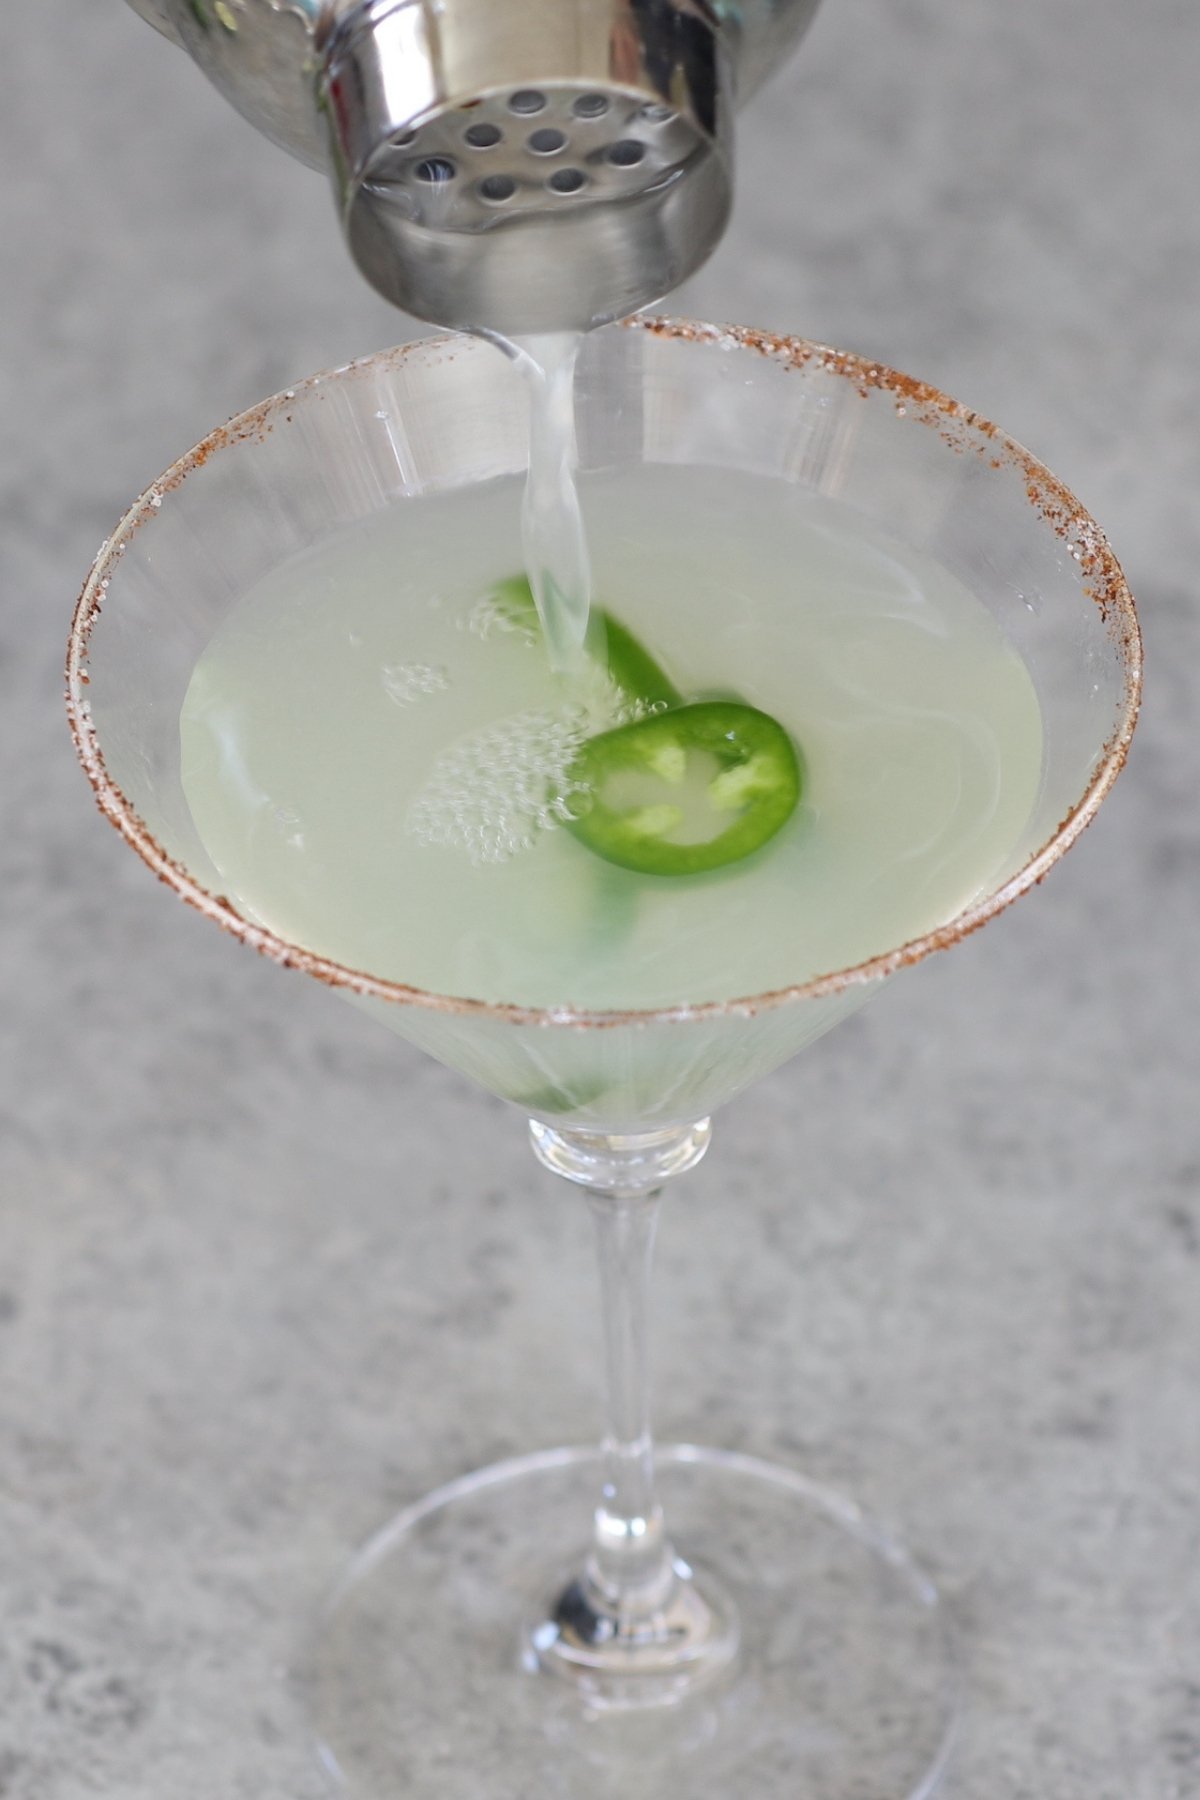 How many margarita variations have you tried? From mango to strawberry to coconut, this classic cocktail comes in so many flavorful options. The most unique one we’ve come across has got to be the spicy margarita, made with jalapeño peppers.